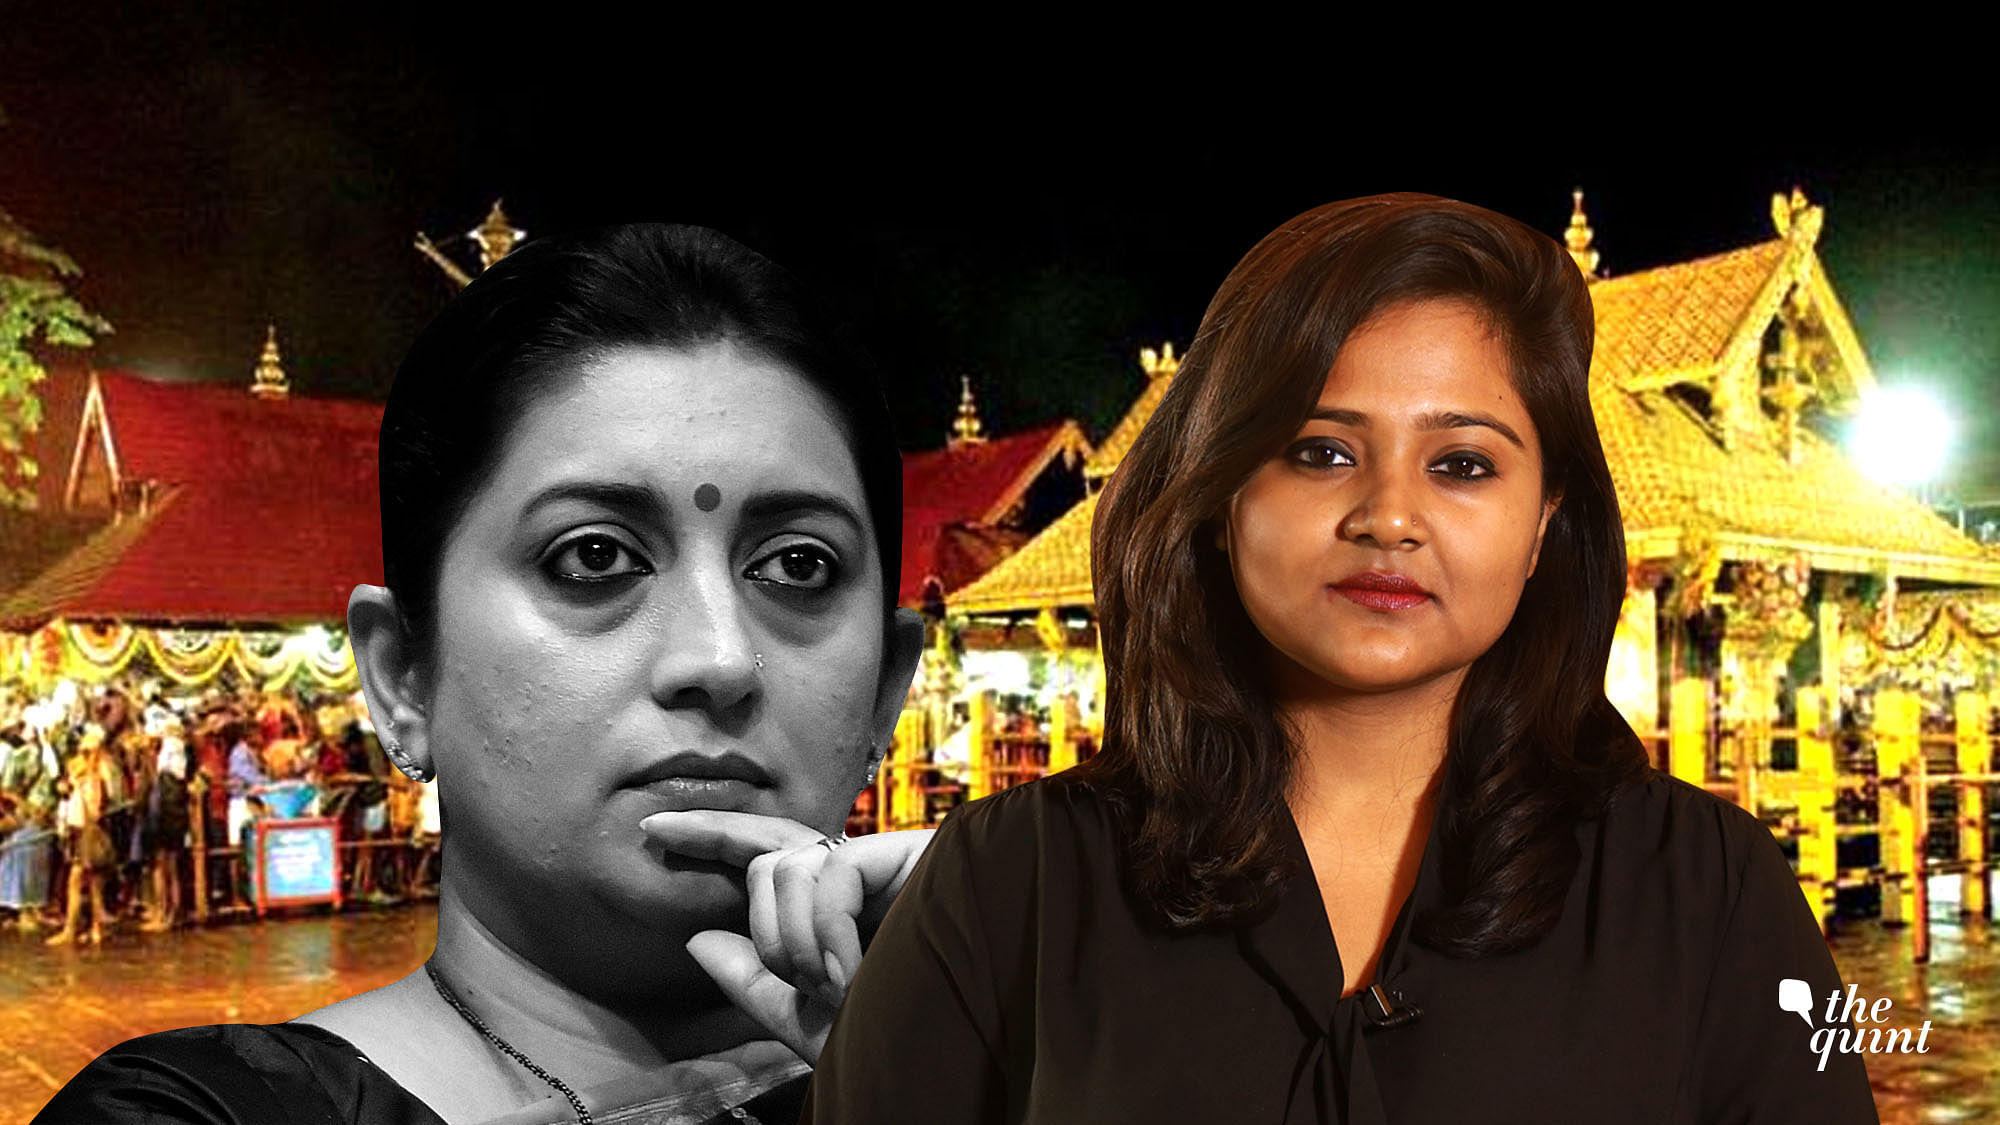 Dear Smriti Irani, your comment on Sabarimala hurts me as a woman and here’s why.